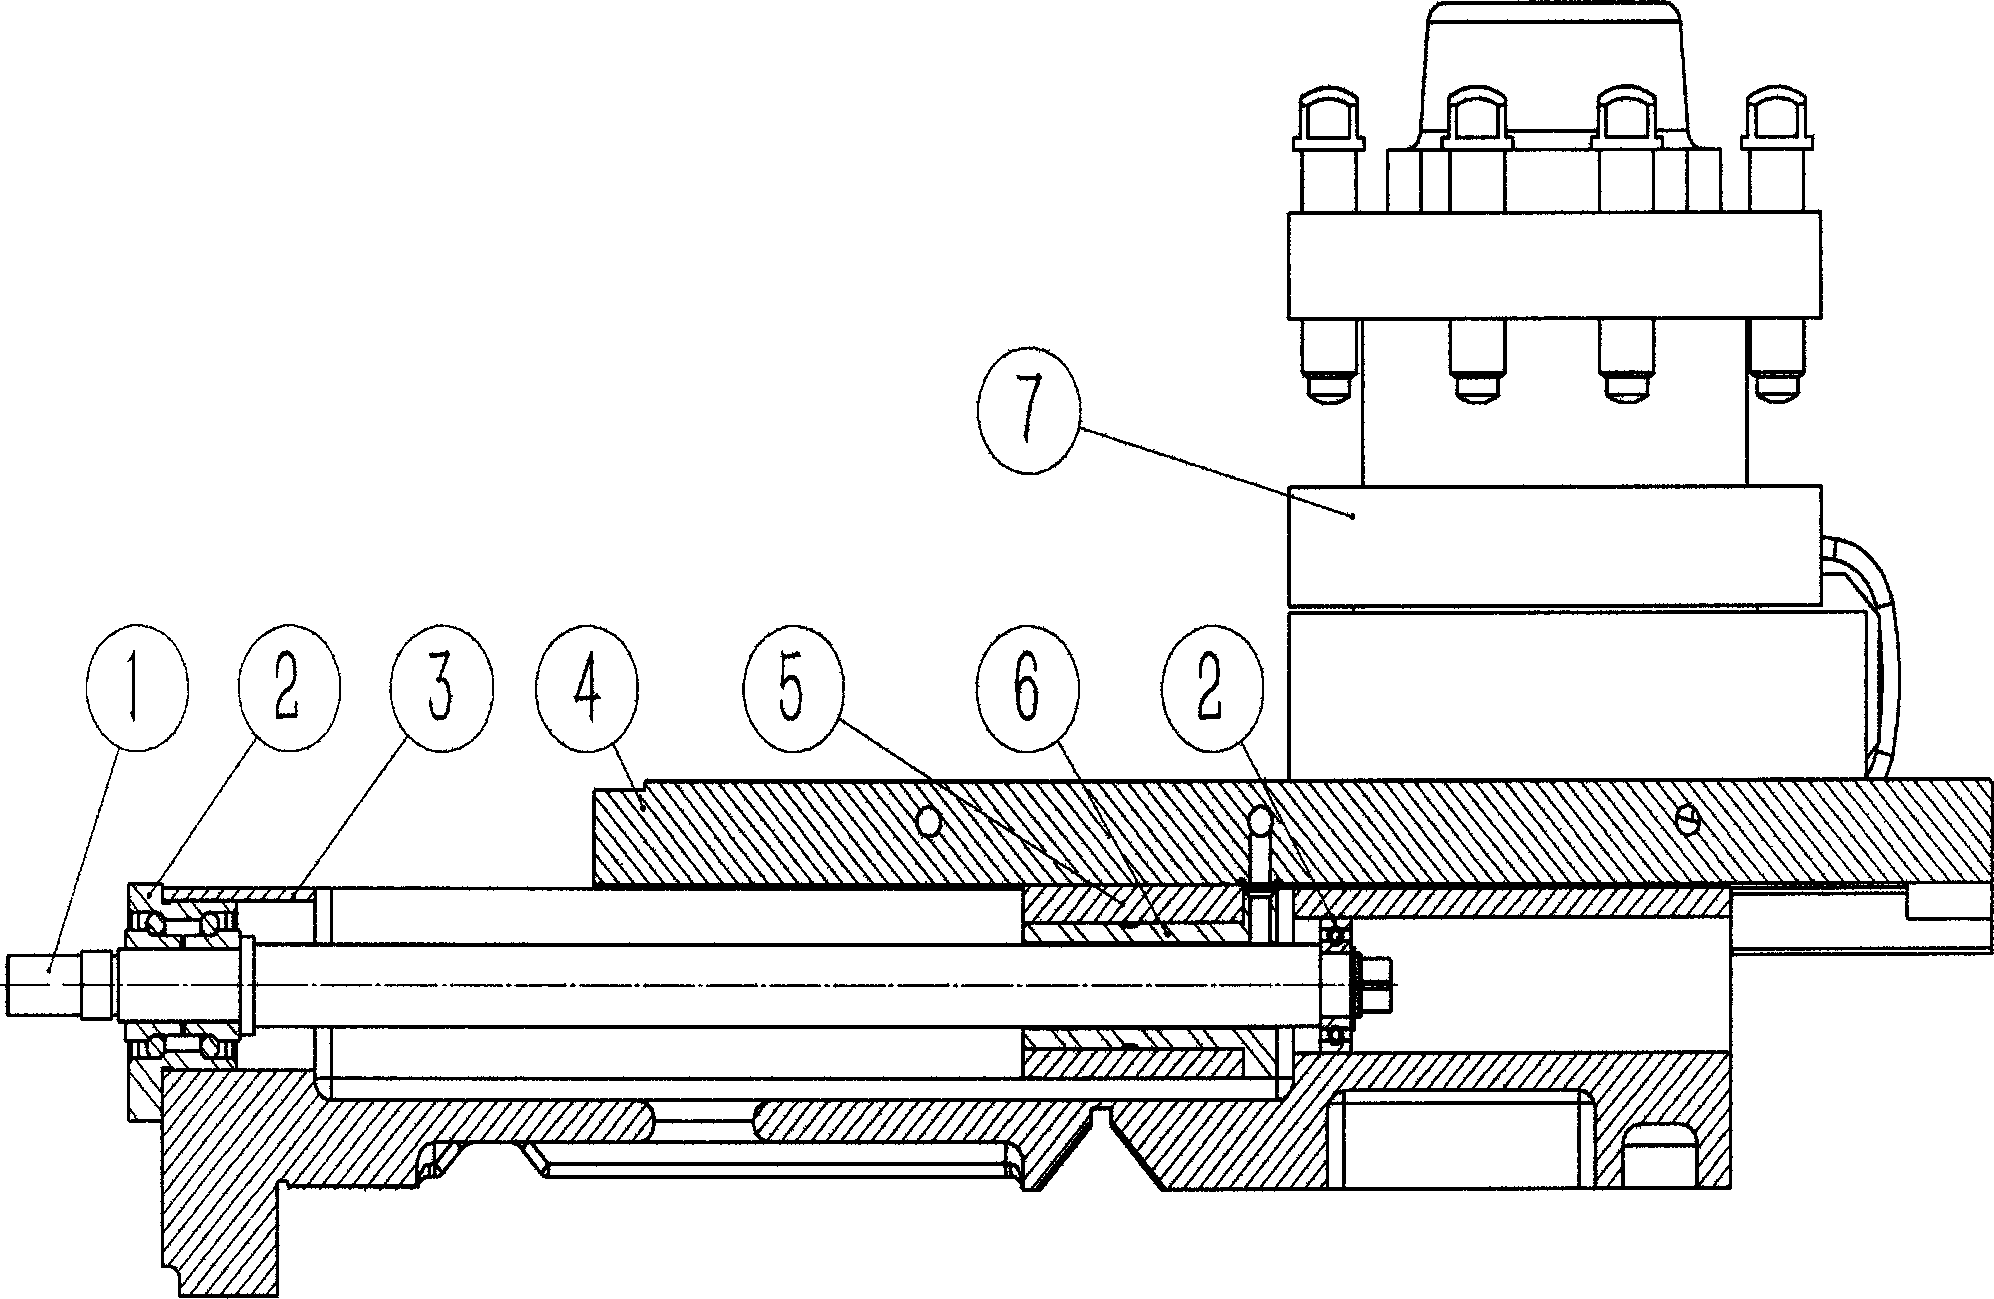 X-axis ball screw assembly fixture of numerically controlled lathe and method for using X-axis ball screw assembly fixture of numerically controlled lathe